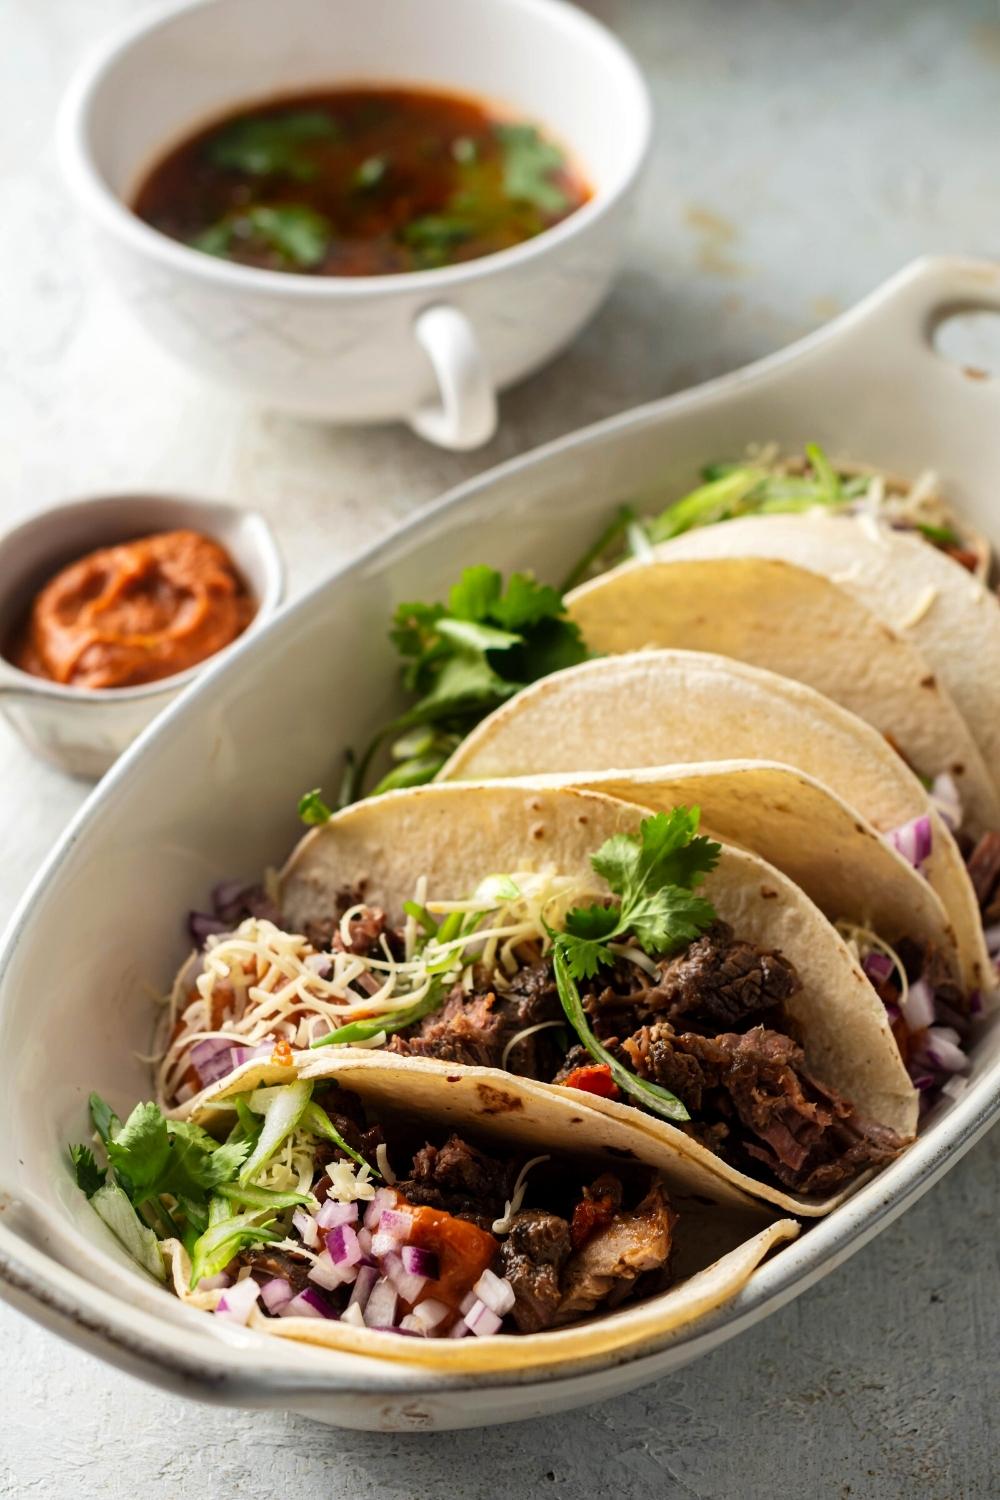 An oval serving bowl with a couple of Birria tacos in it. Behind it is a small bowl of dipping sauce and another bowl of consommé.